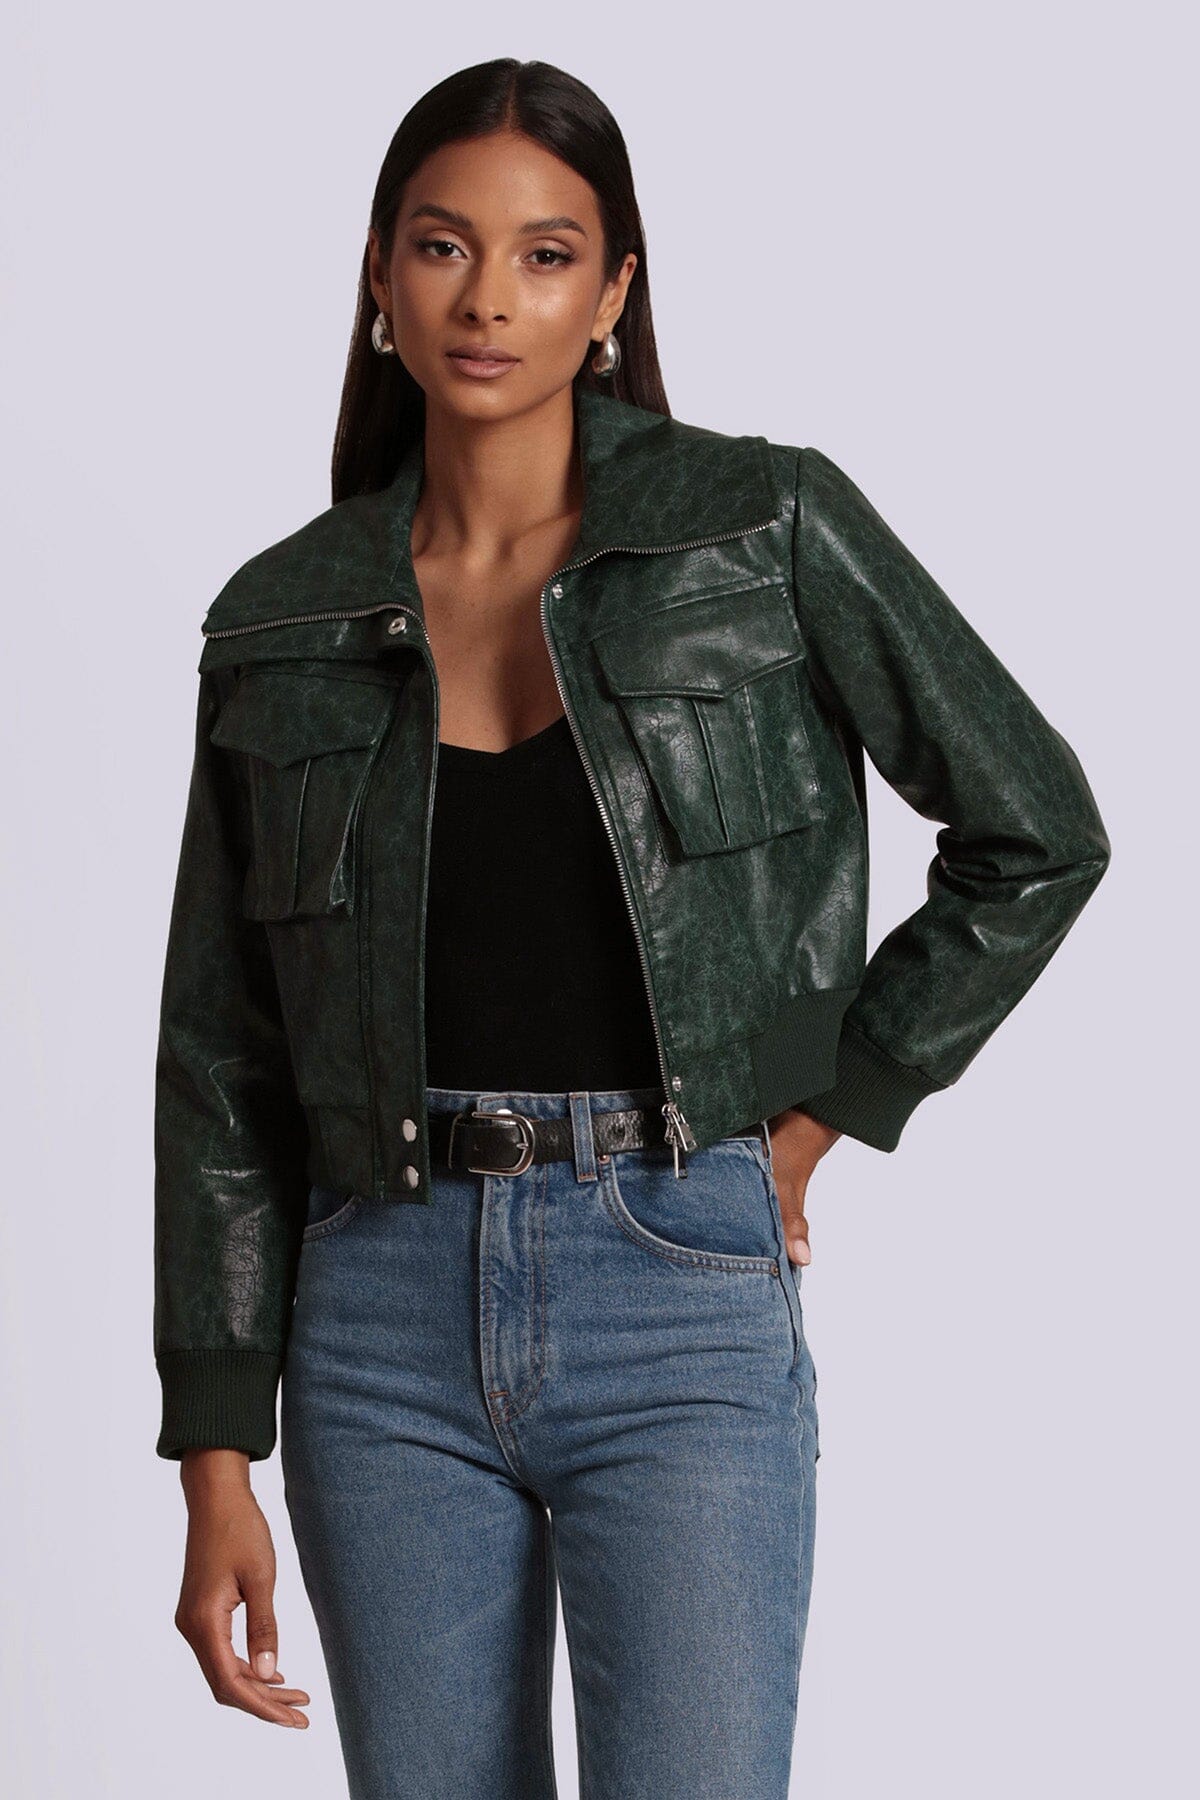 Cropped Coats Jackets Puffers Vests Outerwear